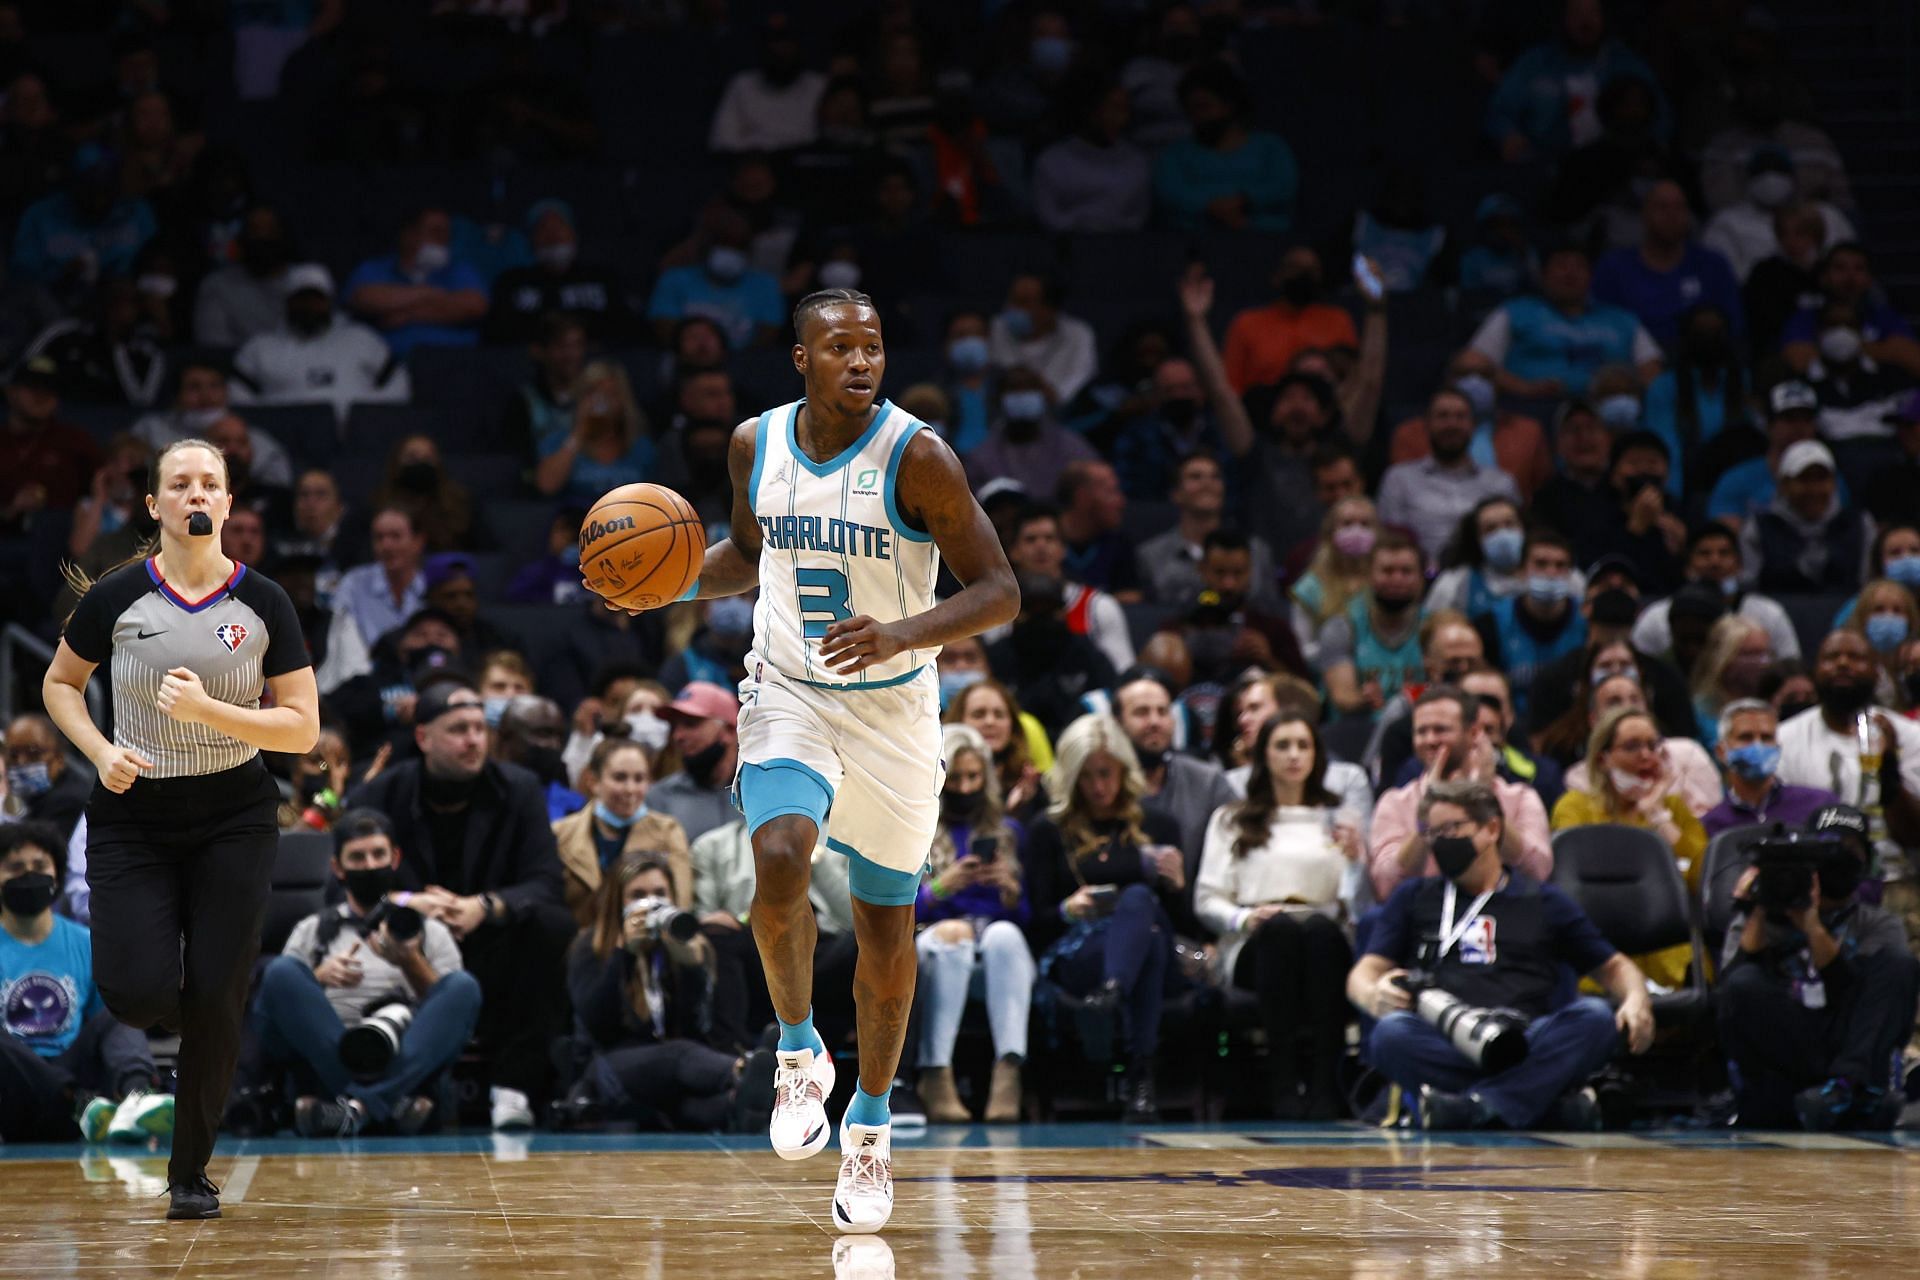 Charlotte Hornets key role player Terry Rozier with the ball